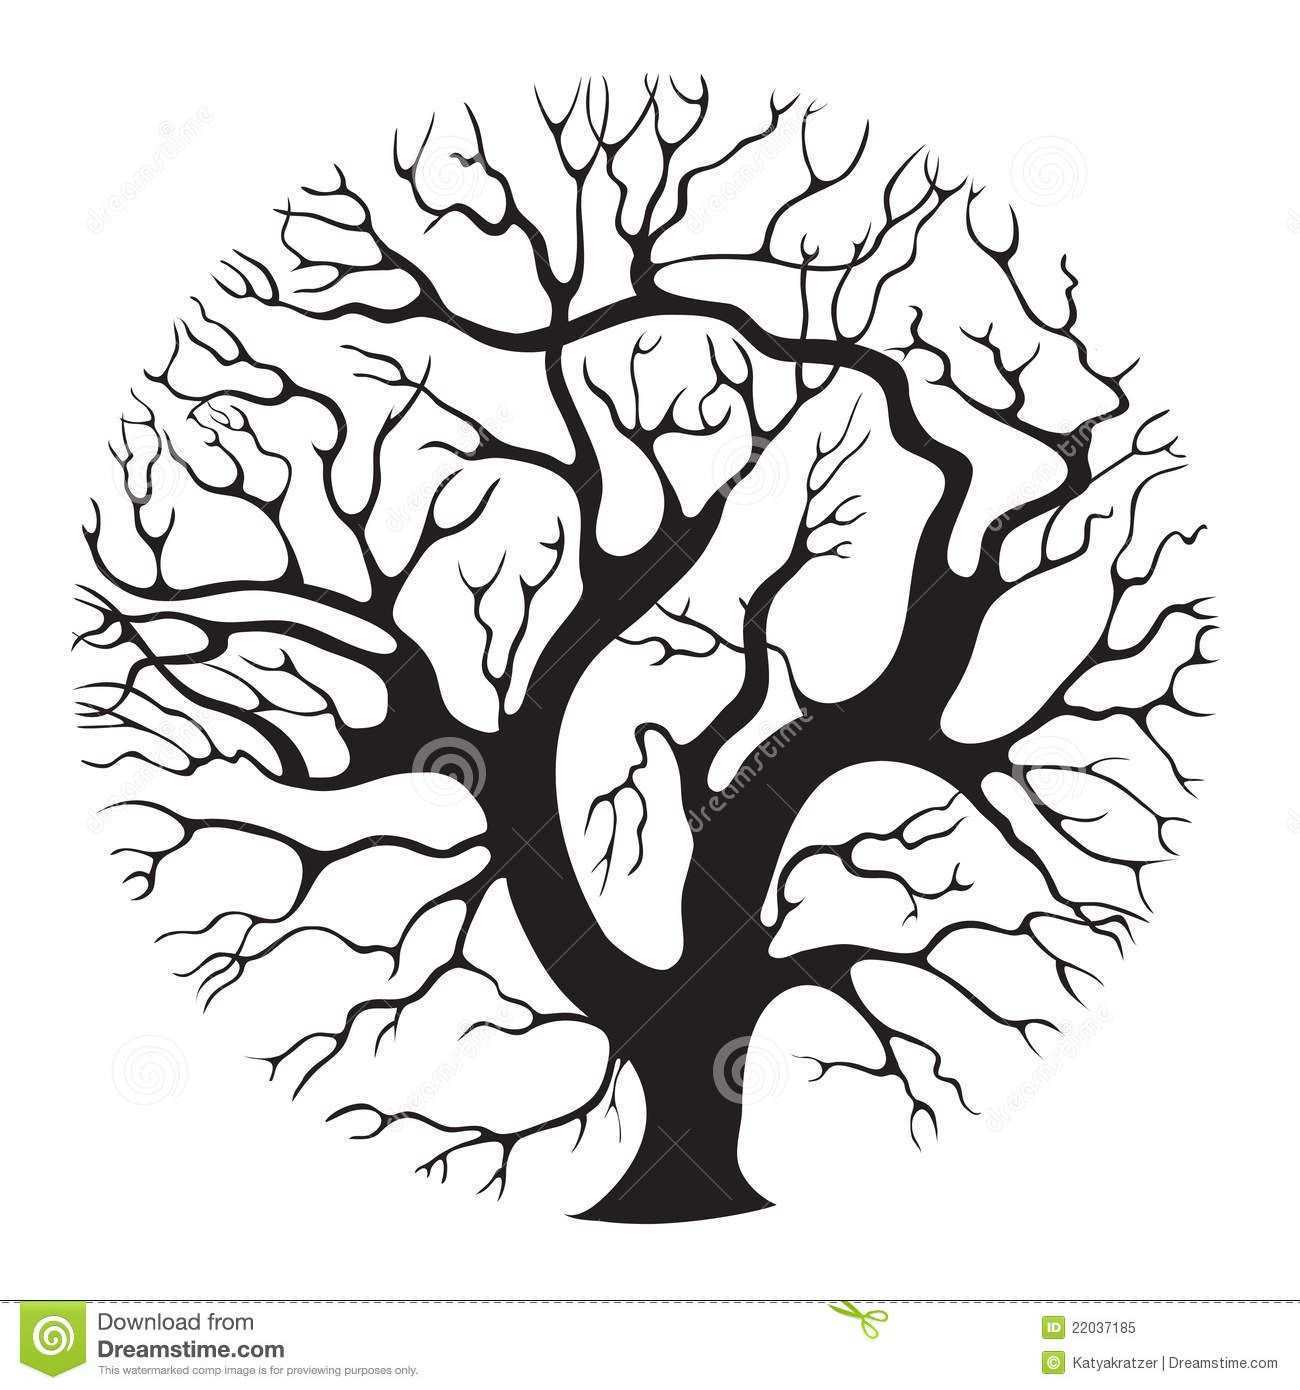 Tree Circle Download From Over 54 Million High Quality Stock Photos Images Vectors Sign Up For Free Today Image 2203 Baume Zeichnen Baumkunst Baumbilder